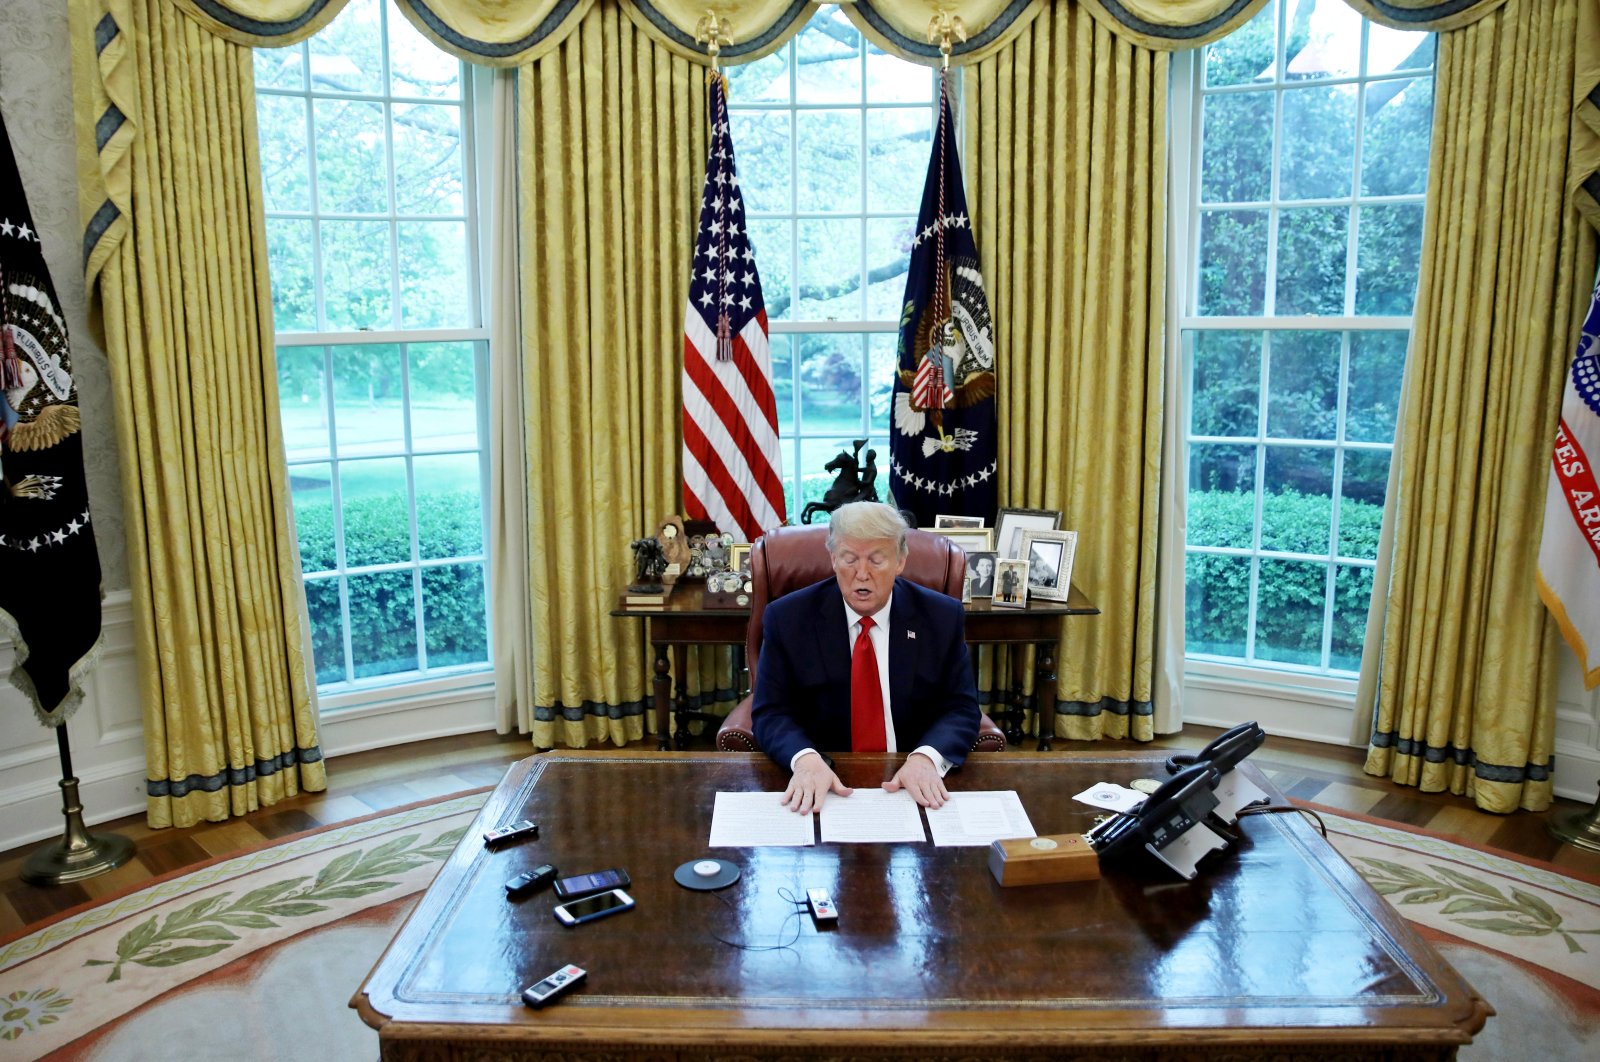 U.S. President Donald Trump looks at his briefing papers in the Oval Office of the White House, Washington, D.C., U.S., April 29, 2020. (REUTERS Photo)